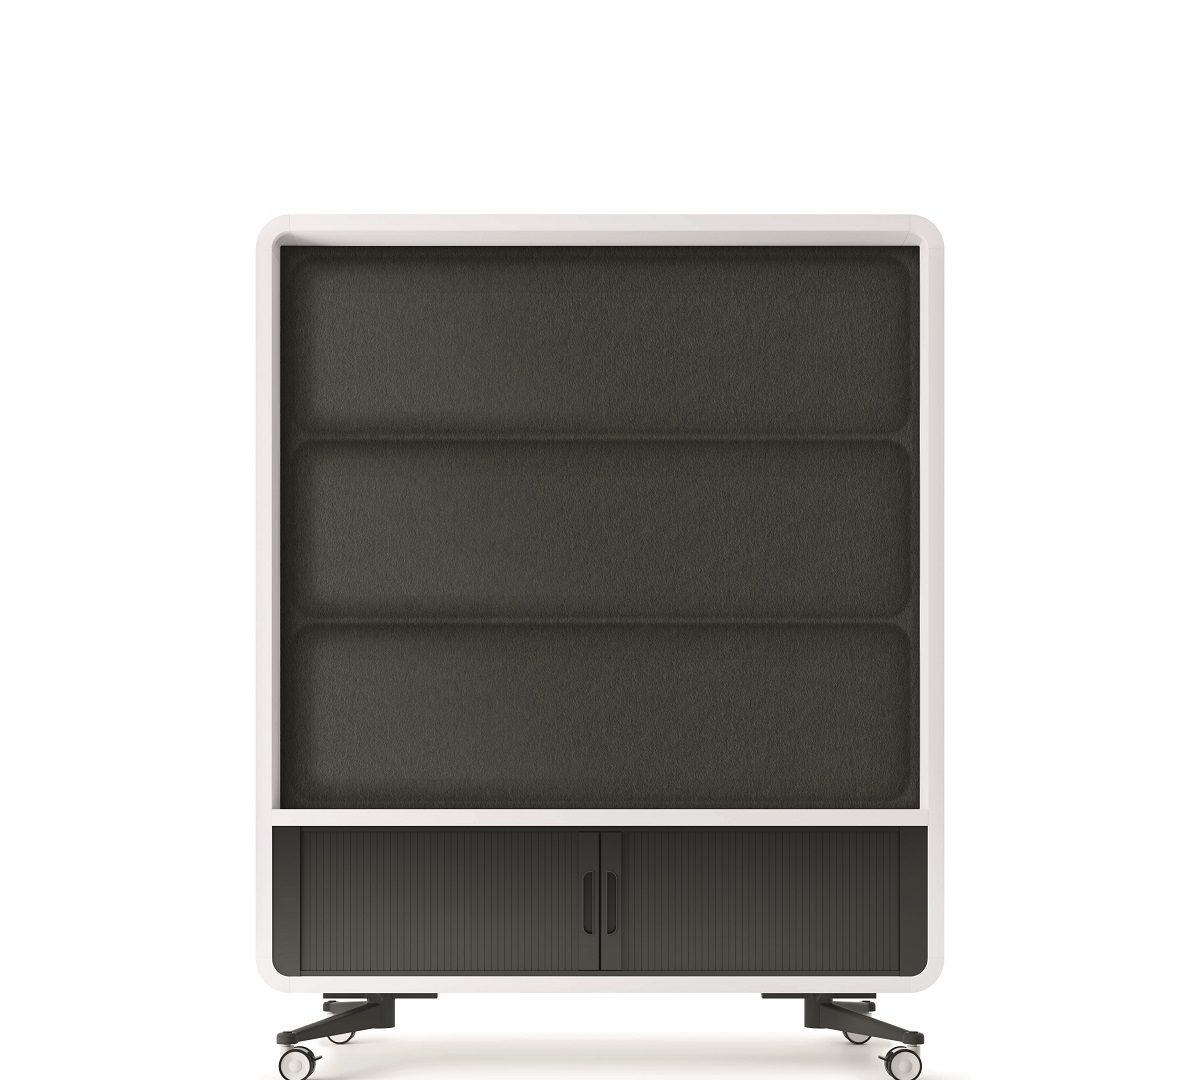 Either side of hushWall room divider can be customized with felt paneling, modified felt paneling (with a place to mount a TV bracket), or a whiteboard.